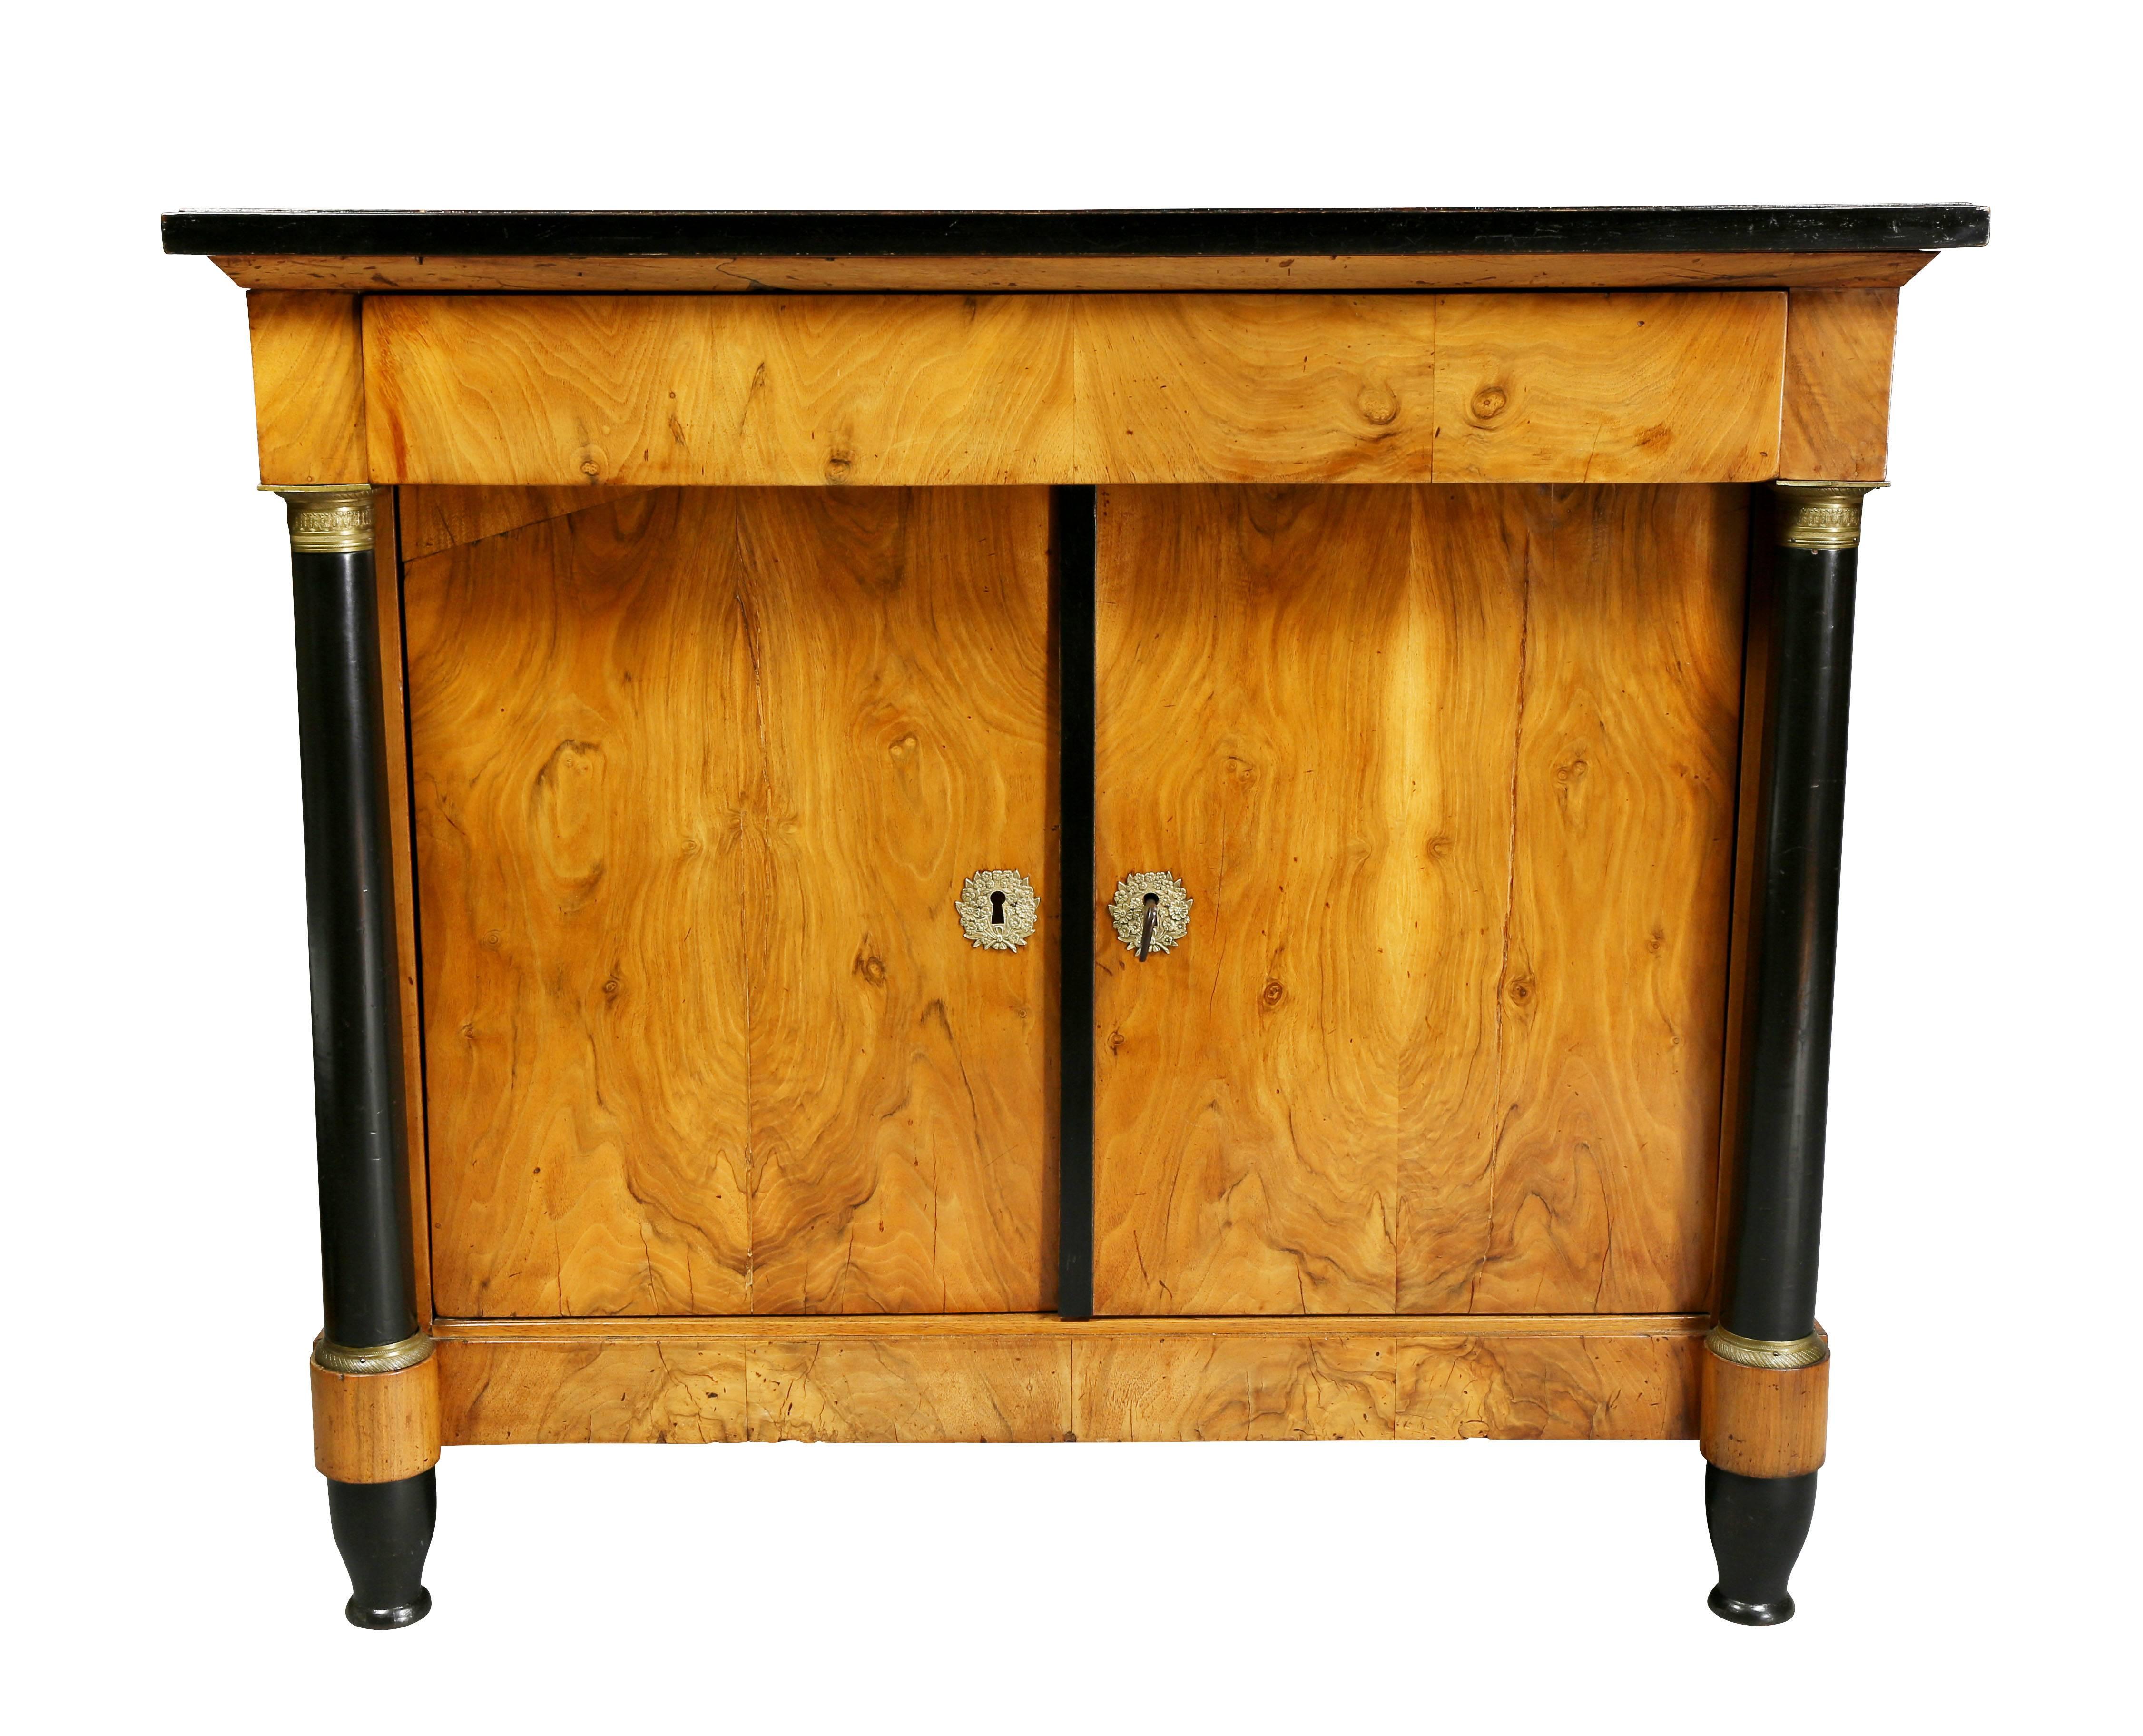 Rectangular top over a drawer and pair of cabinet doors flanked by columns raised on turned feet.